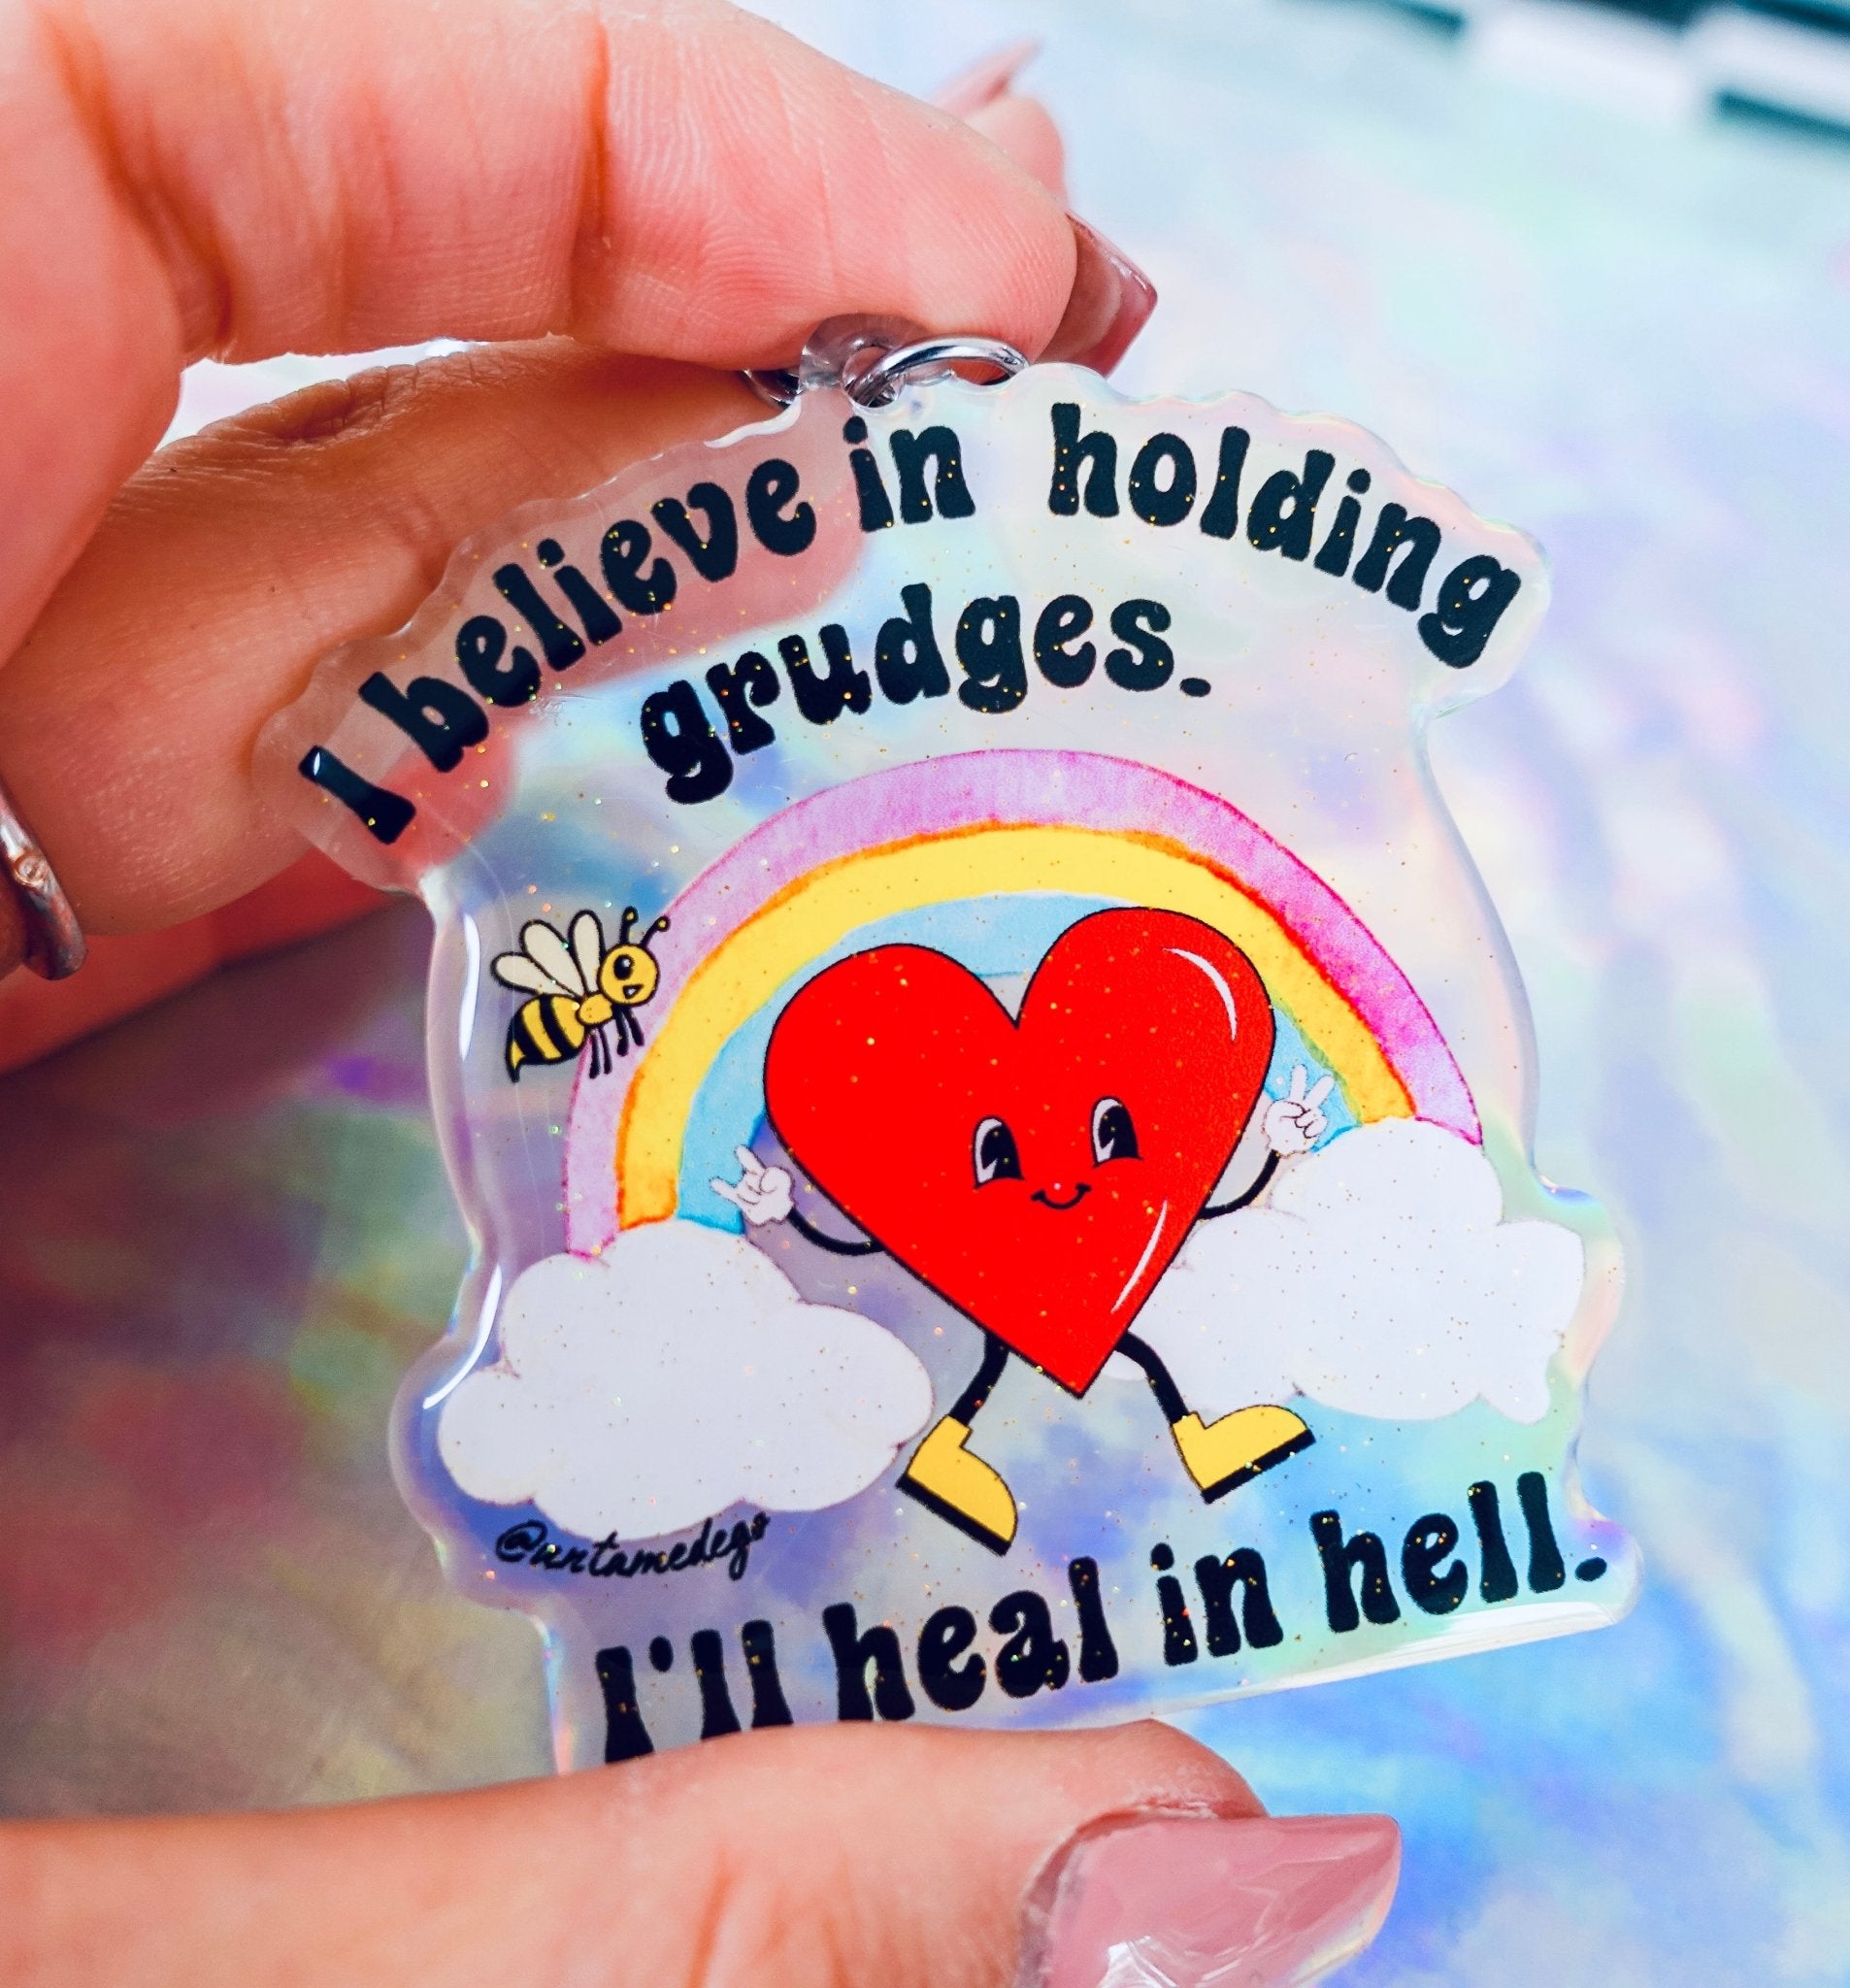 I Believe In Holding Grudges I'll Heal In Hell Keychain - UntamedEgo LLC.